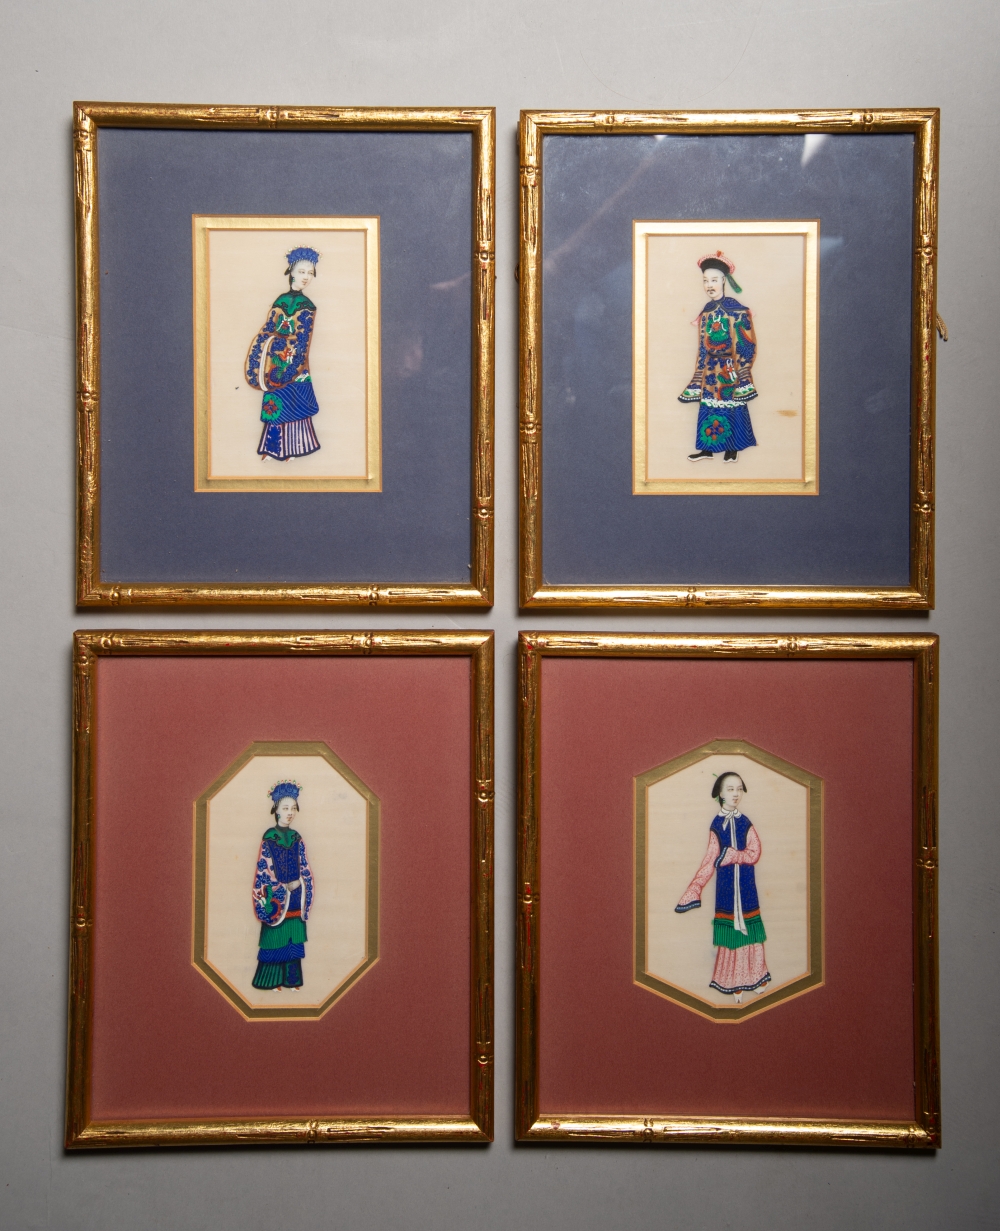 A 19TH CENTURY SET OF FOUR EXTREMELY FINE HAND PAINTED FIGURES ON SILK, c.1840, gently padded in